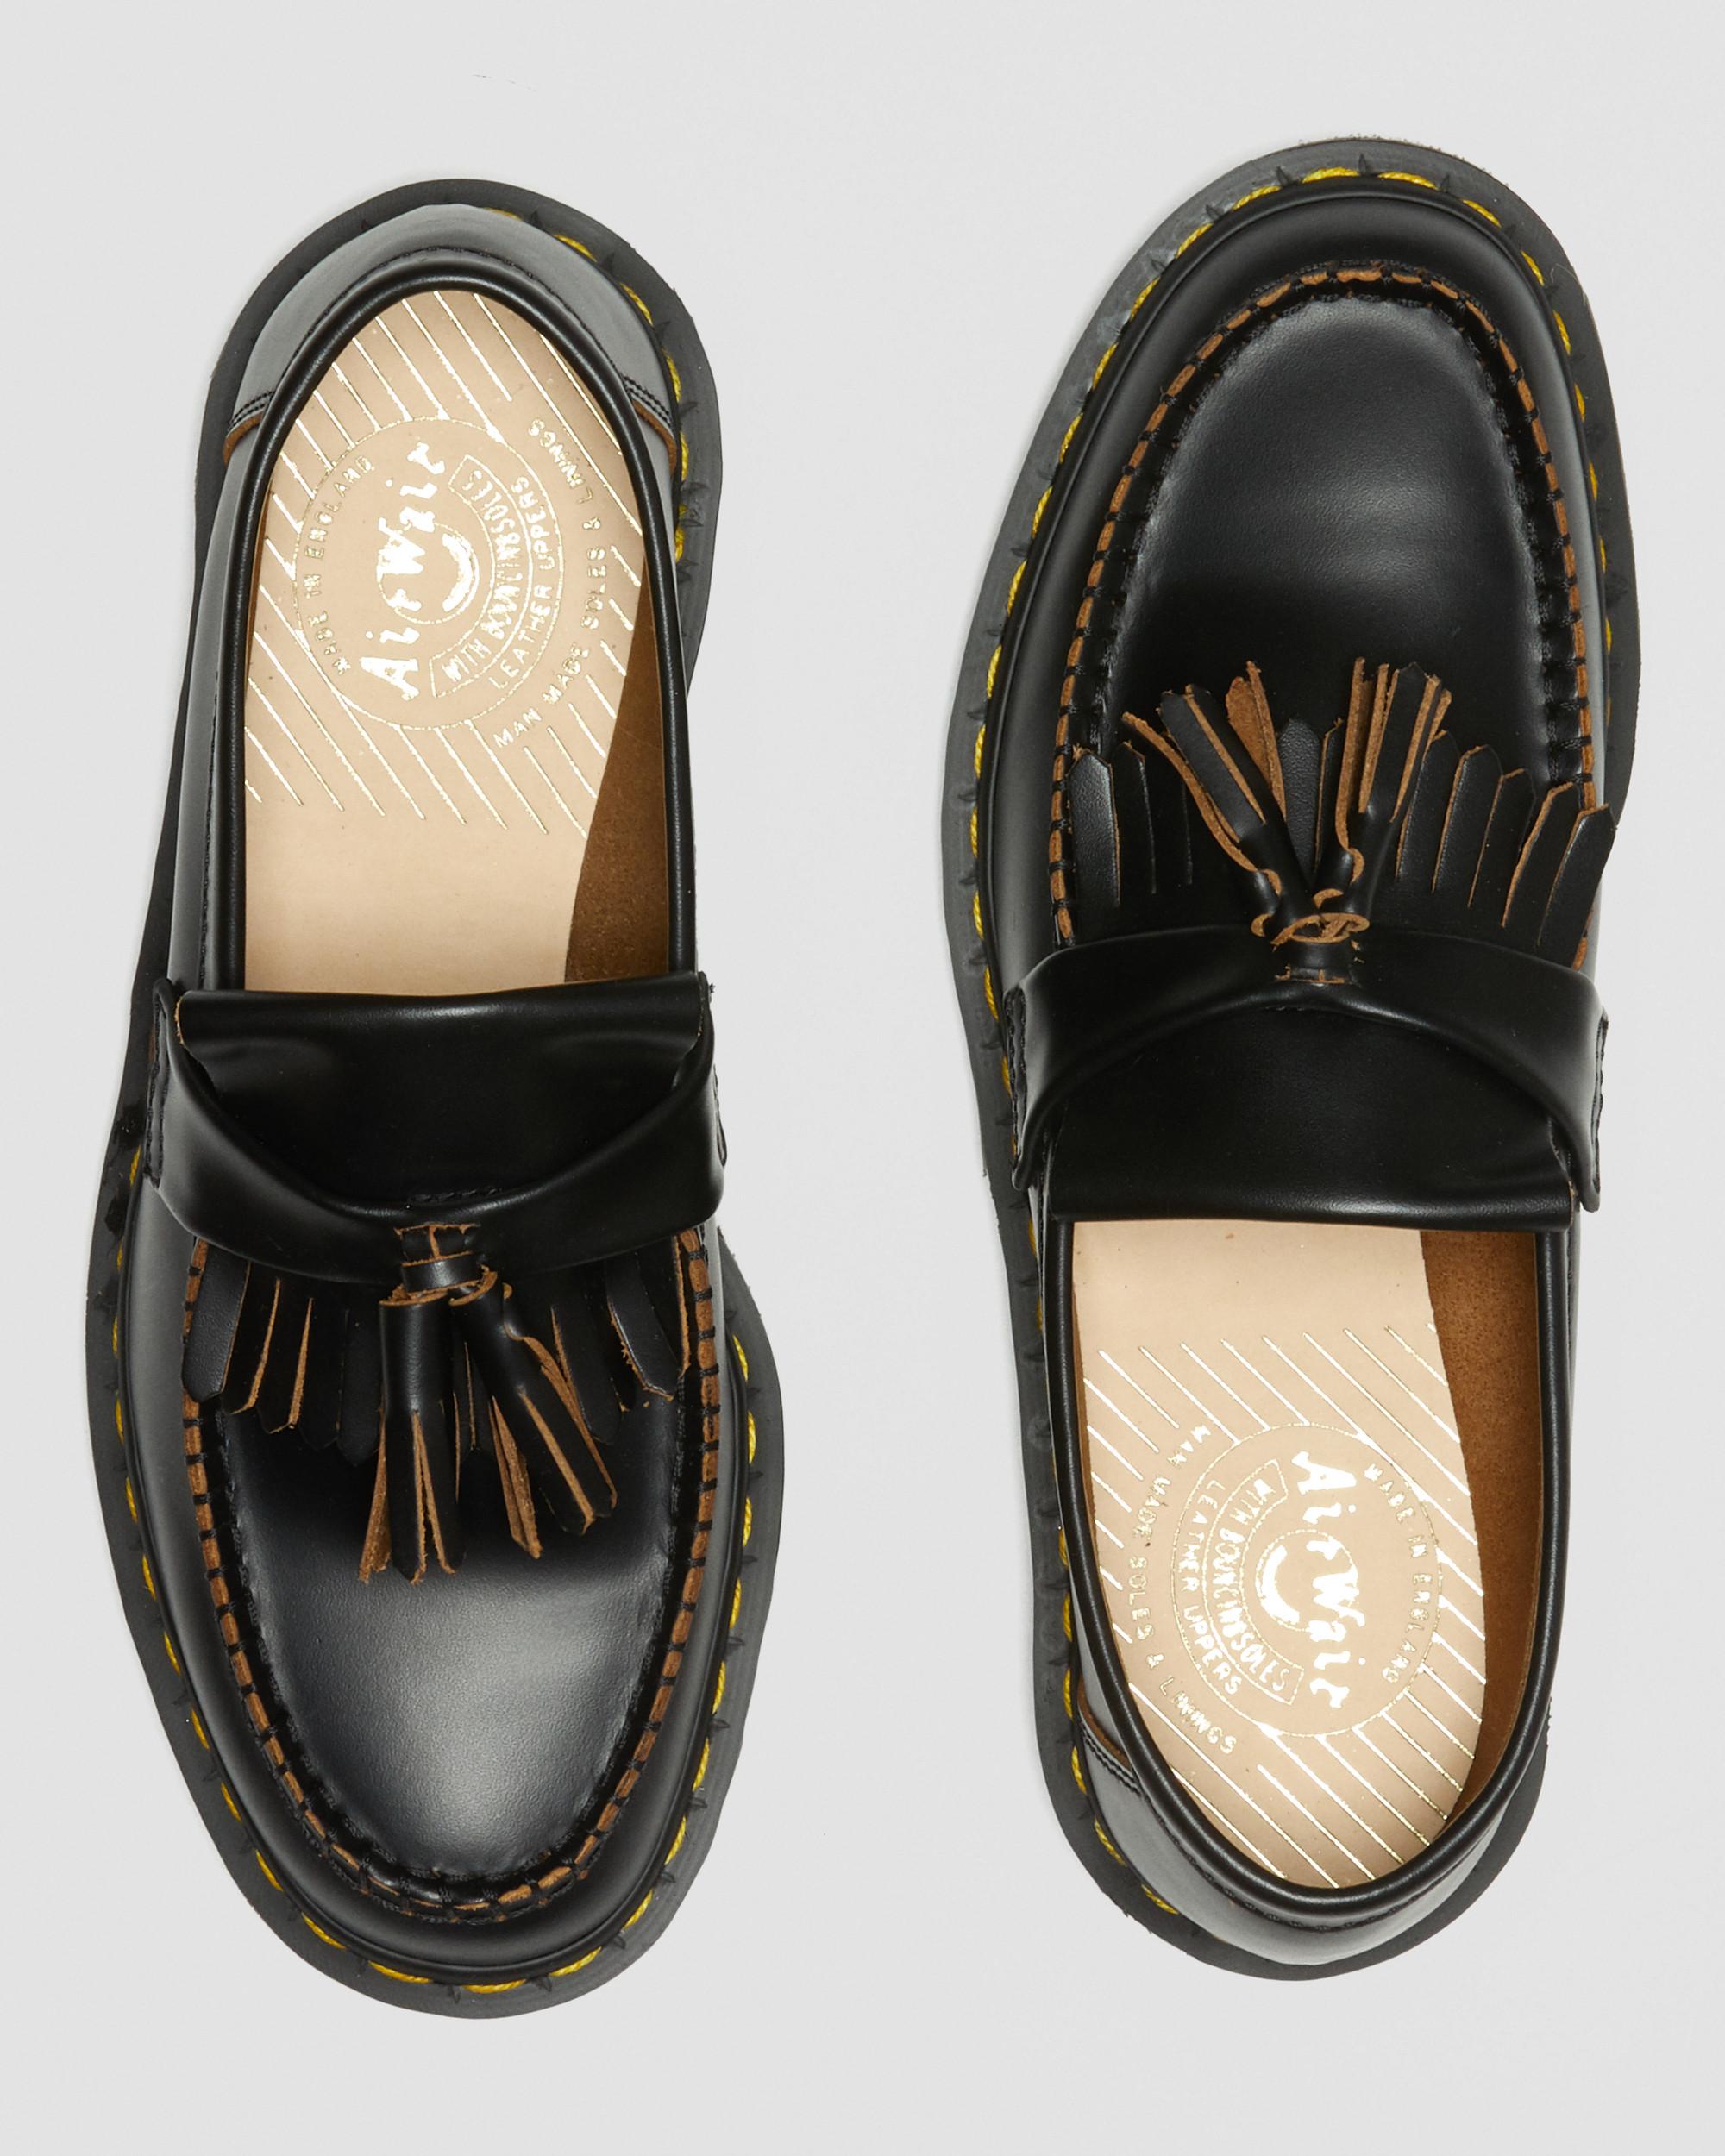 Adrian Made in England Vintage Leather Tassel Loafers, Black | Dr